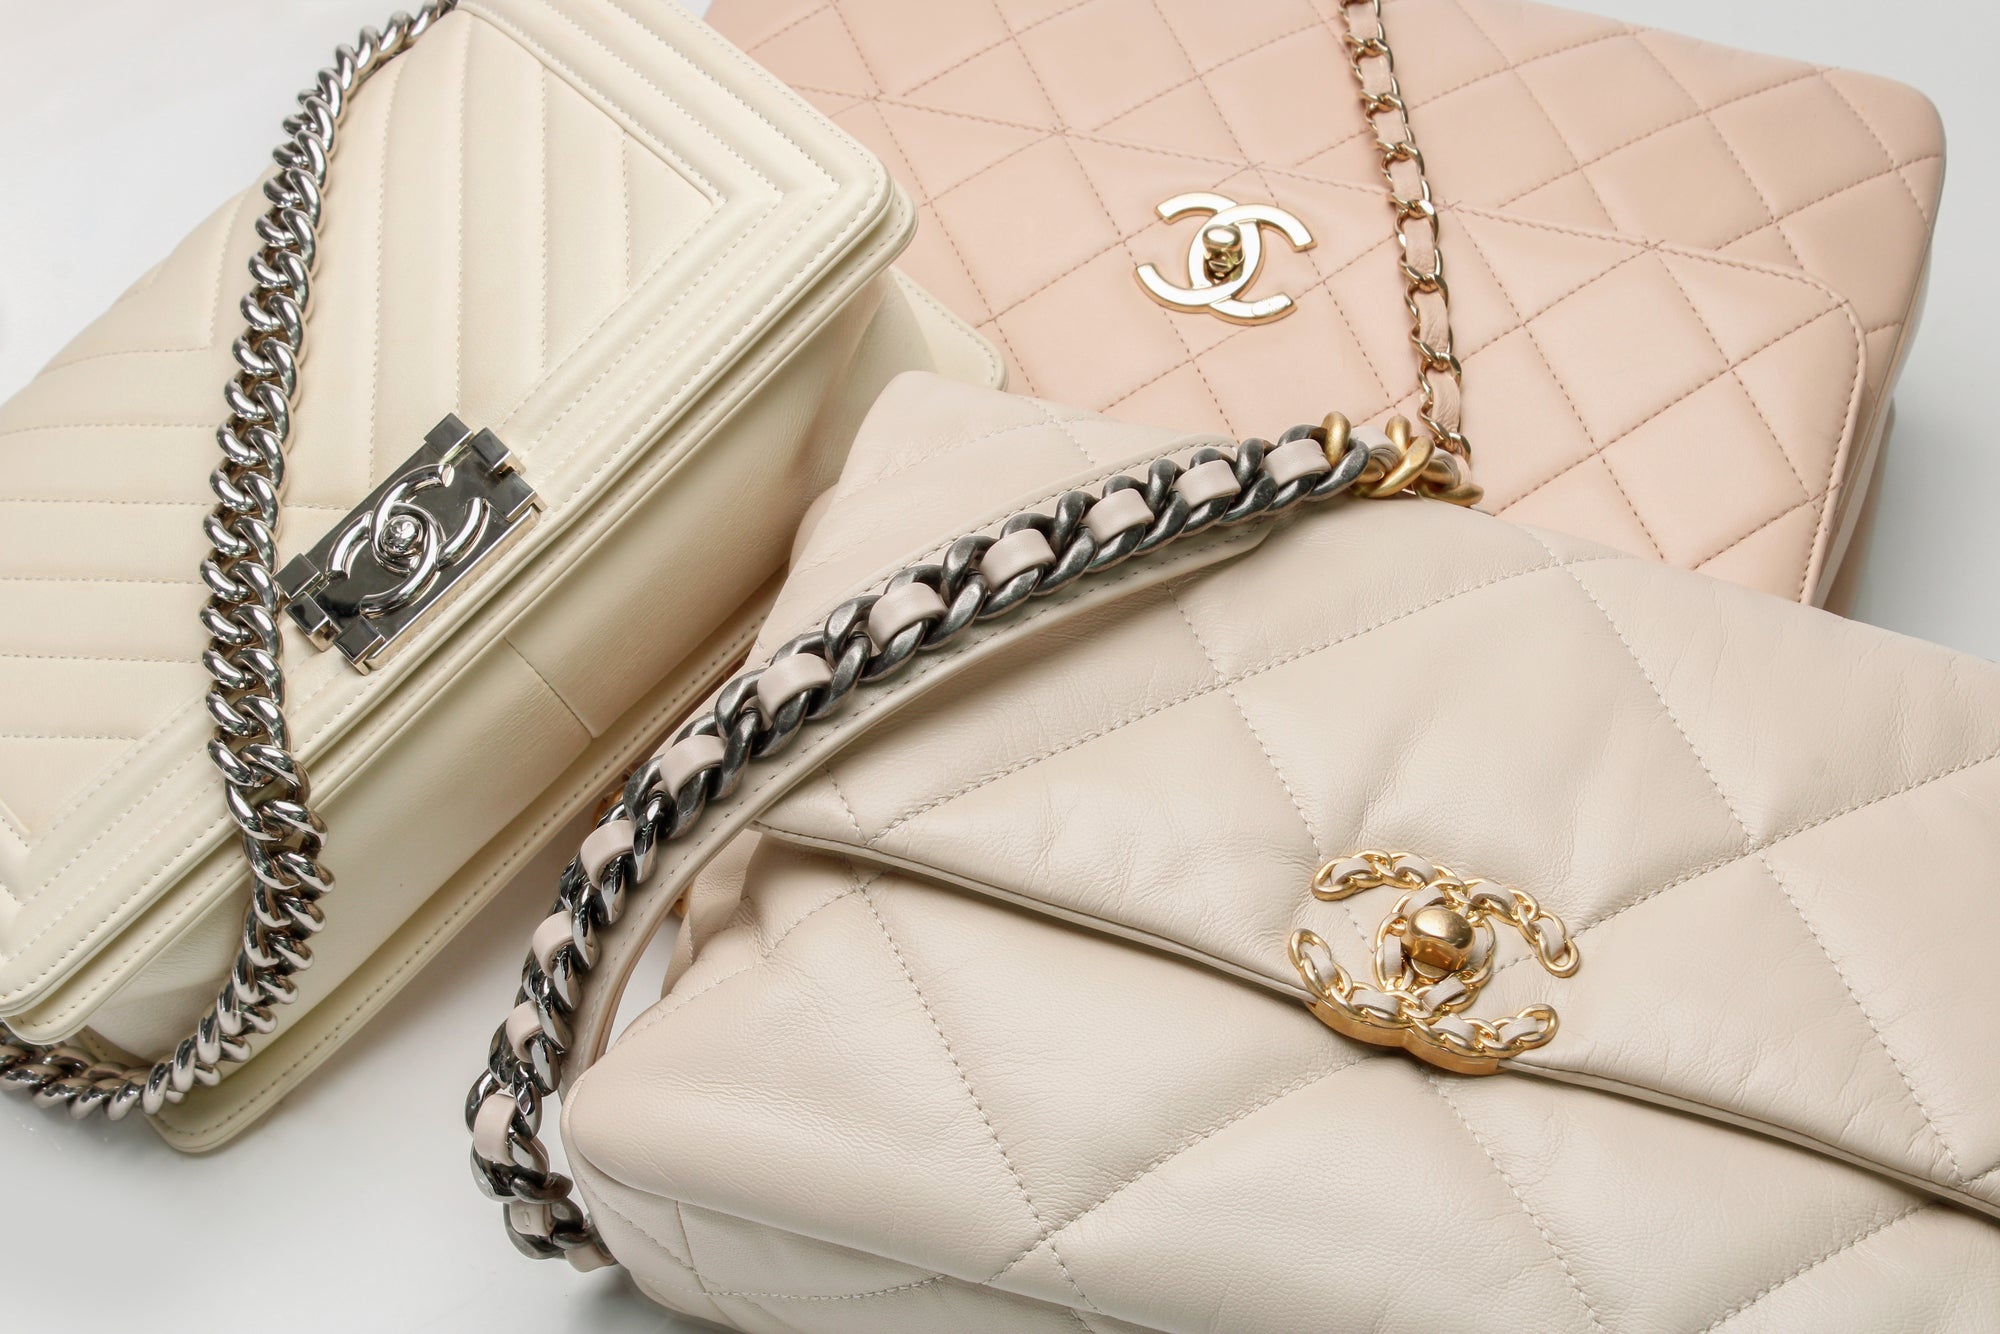 A Quick Guide to Chanel Serial Numbers